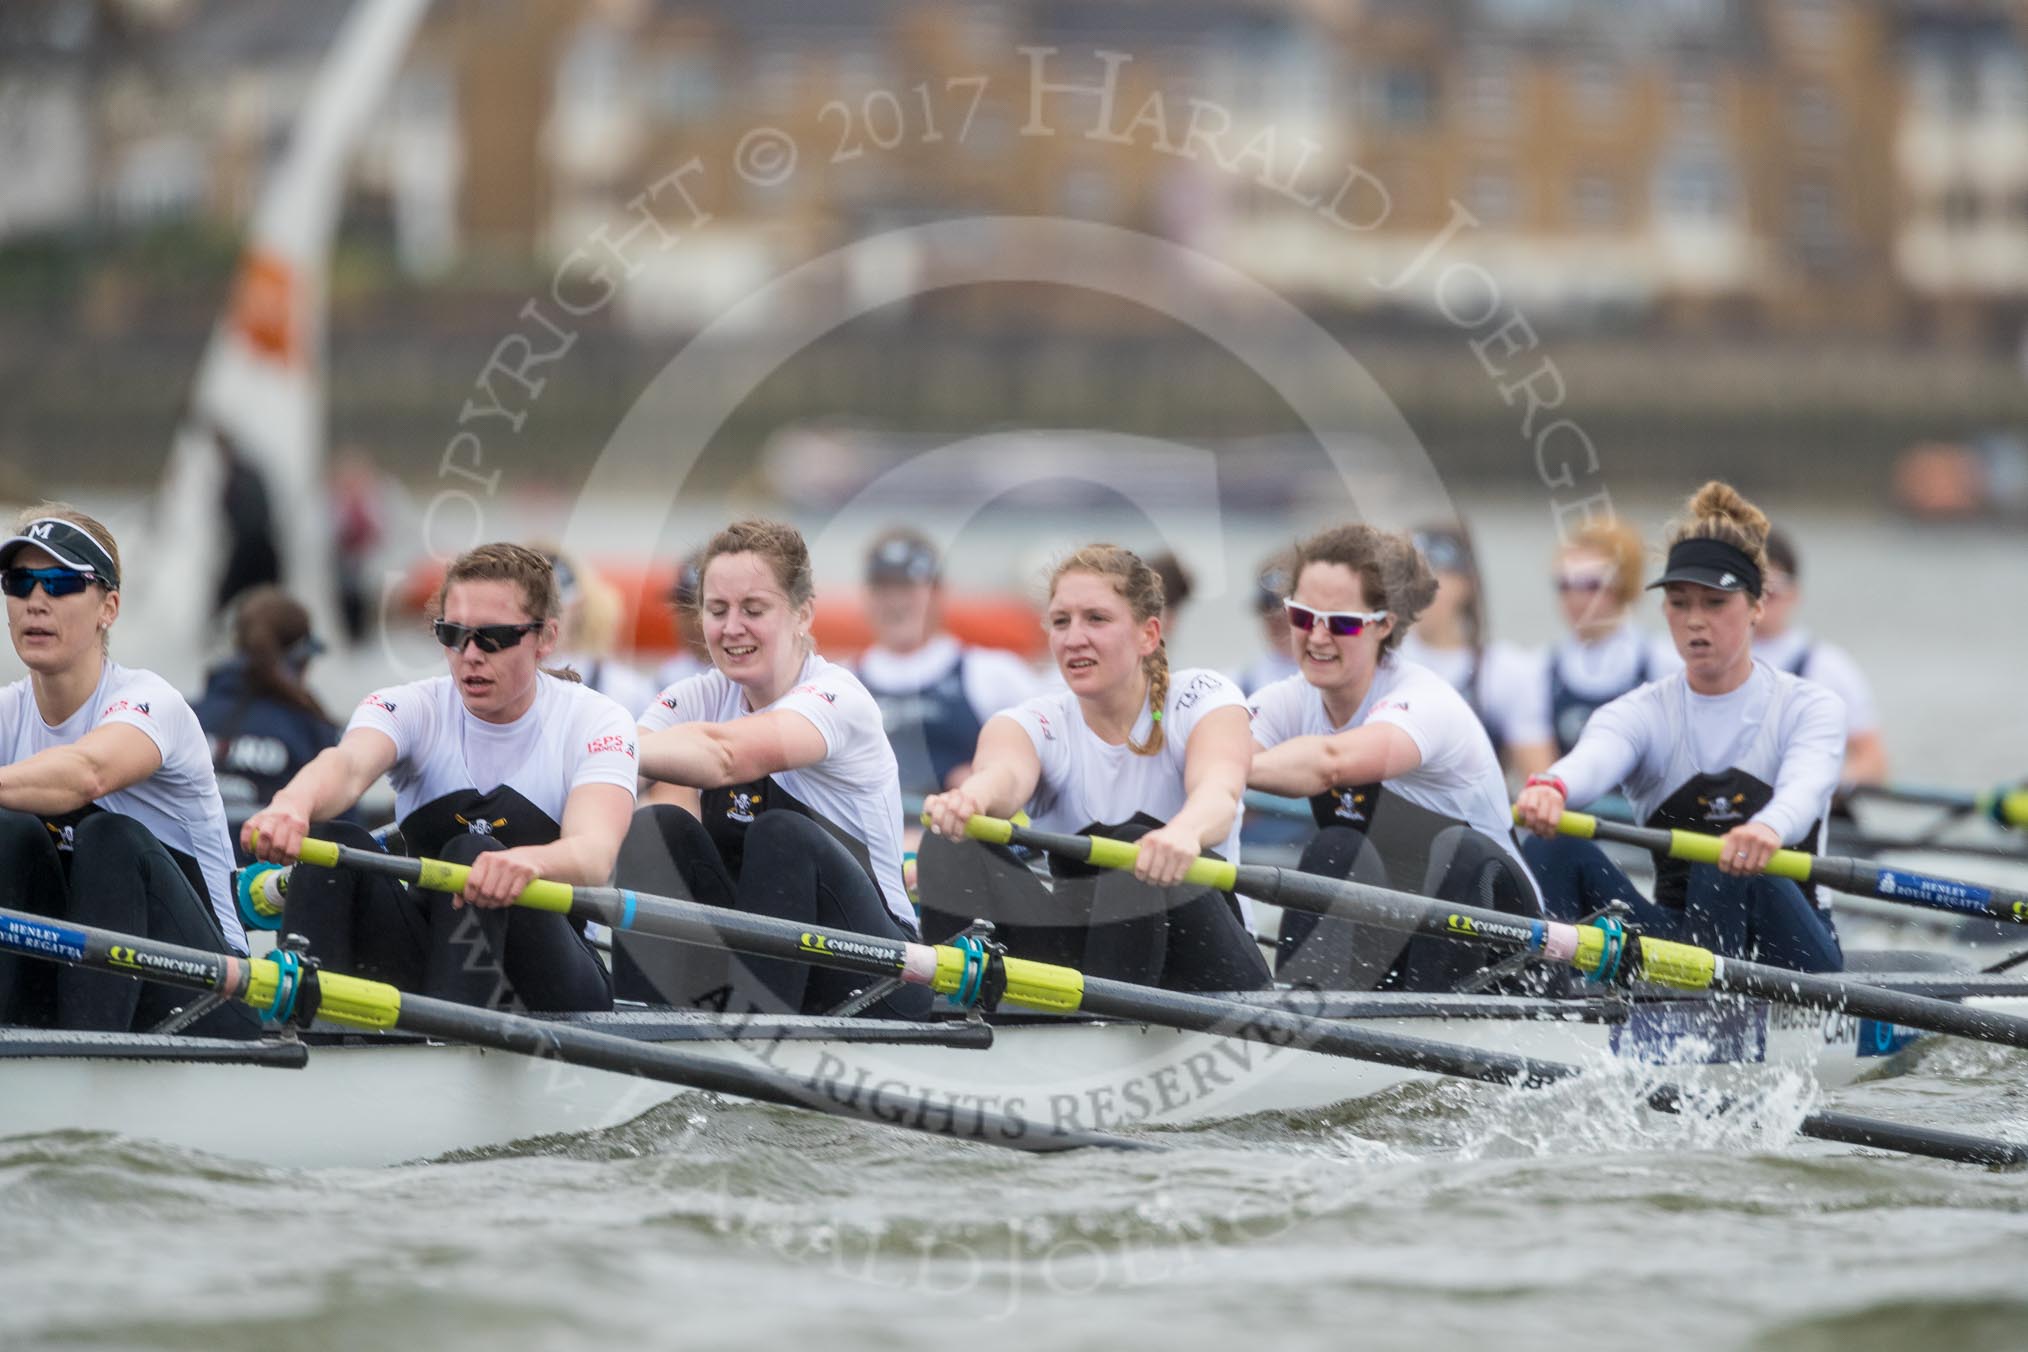 The Cancer Research UK Boat Race season 2017 - Women's Boat Race Fixture OUWBC vs Molesey BC: The Molesey Eight, a bit behind OUWBC - 6 Elo Luik, 5 Katie Bartlett, 4 Claire McKeown, 3 Lucy Primmer, 2 Caitlin Boyland, bow Emma McDonald.
River Thames between Putney Bridge and Mortlake,
London SW15,

United Kingdom,
on 19 March 2017 at 16:10, image #110